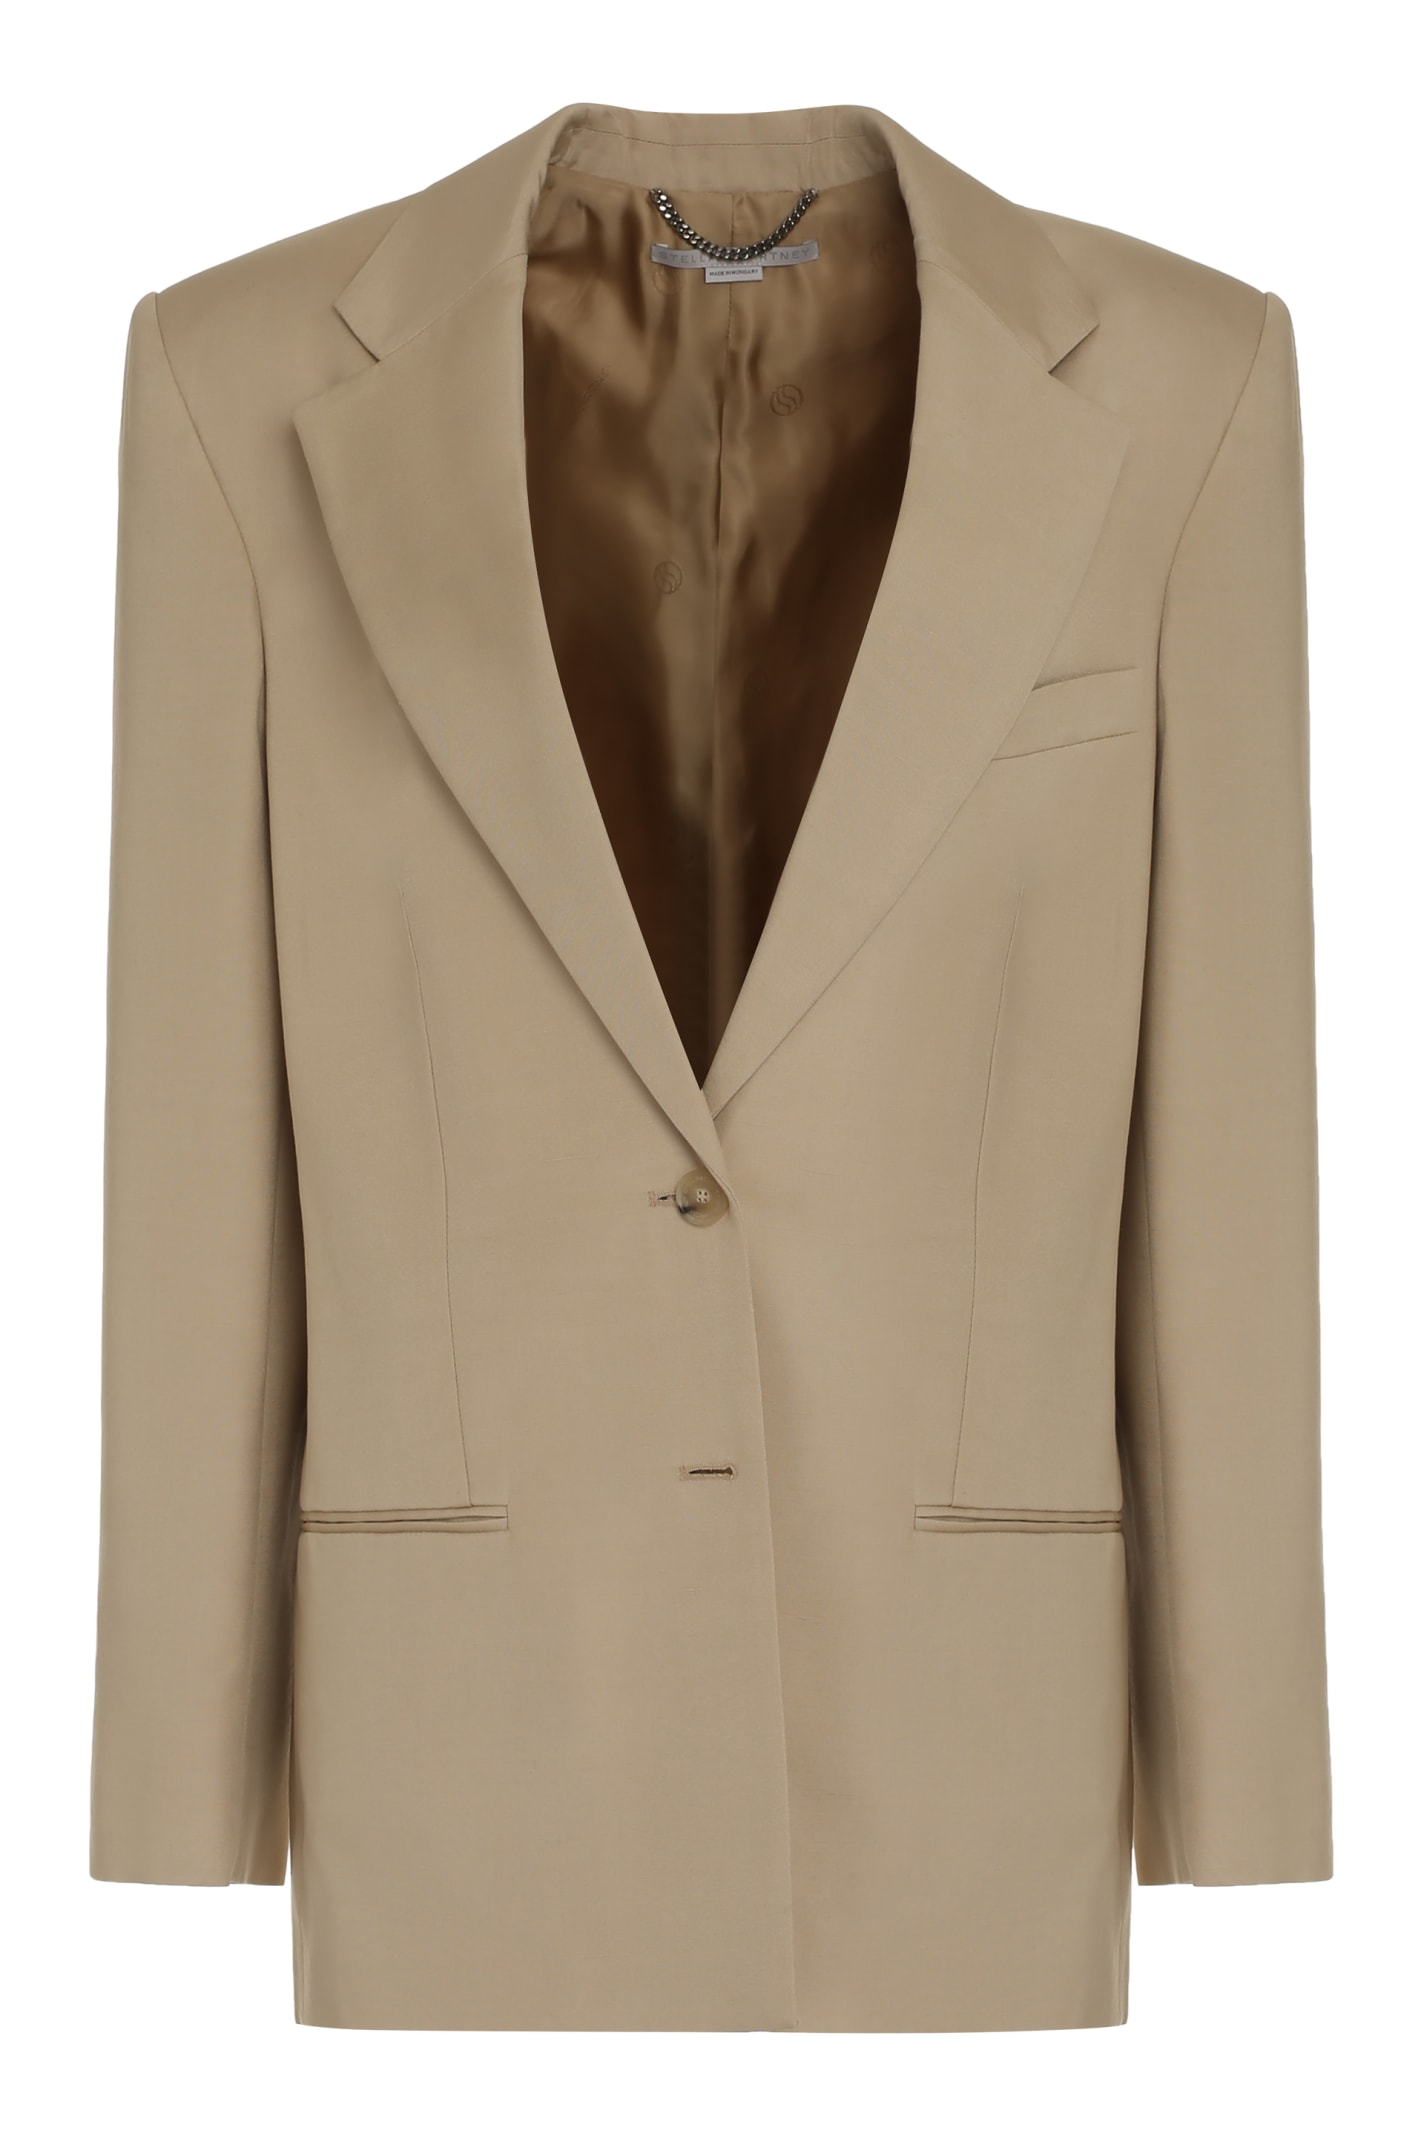 STELLA MCCARTNEY SINGLE-BREASTED TWO-BUTTON JACKET